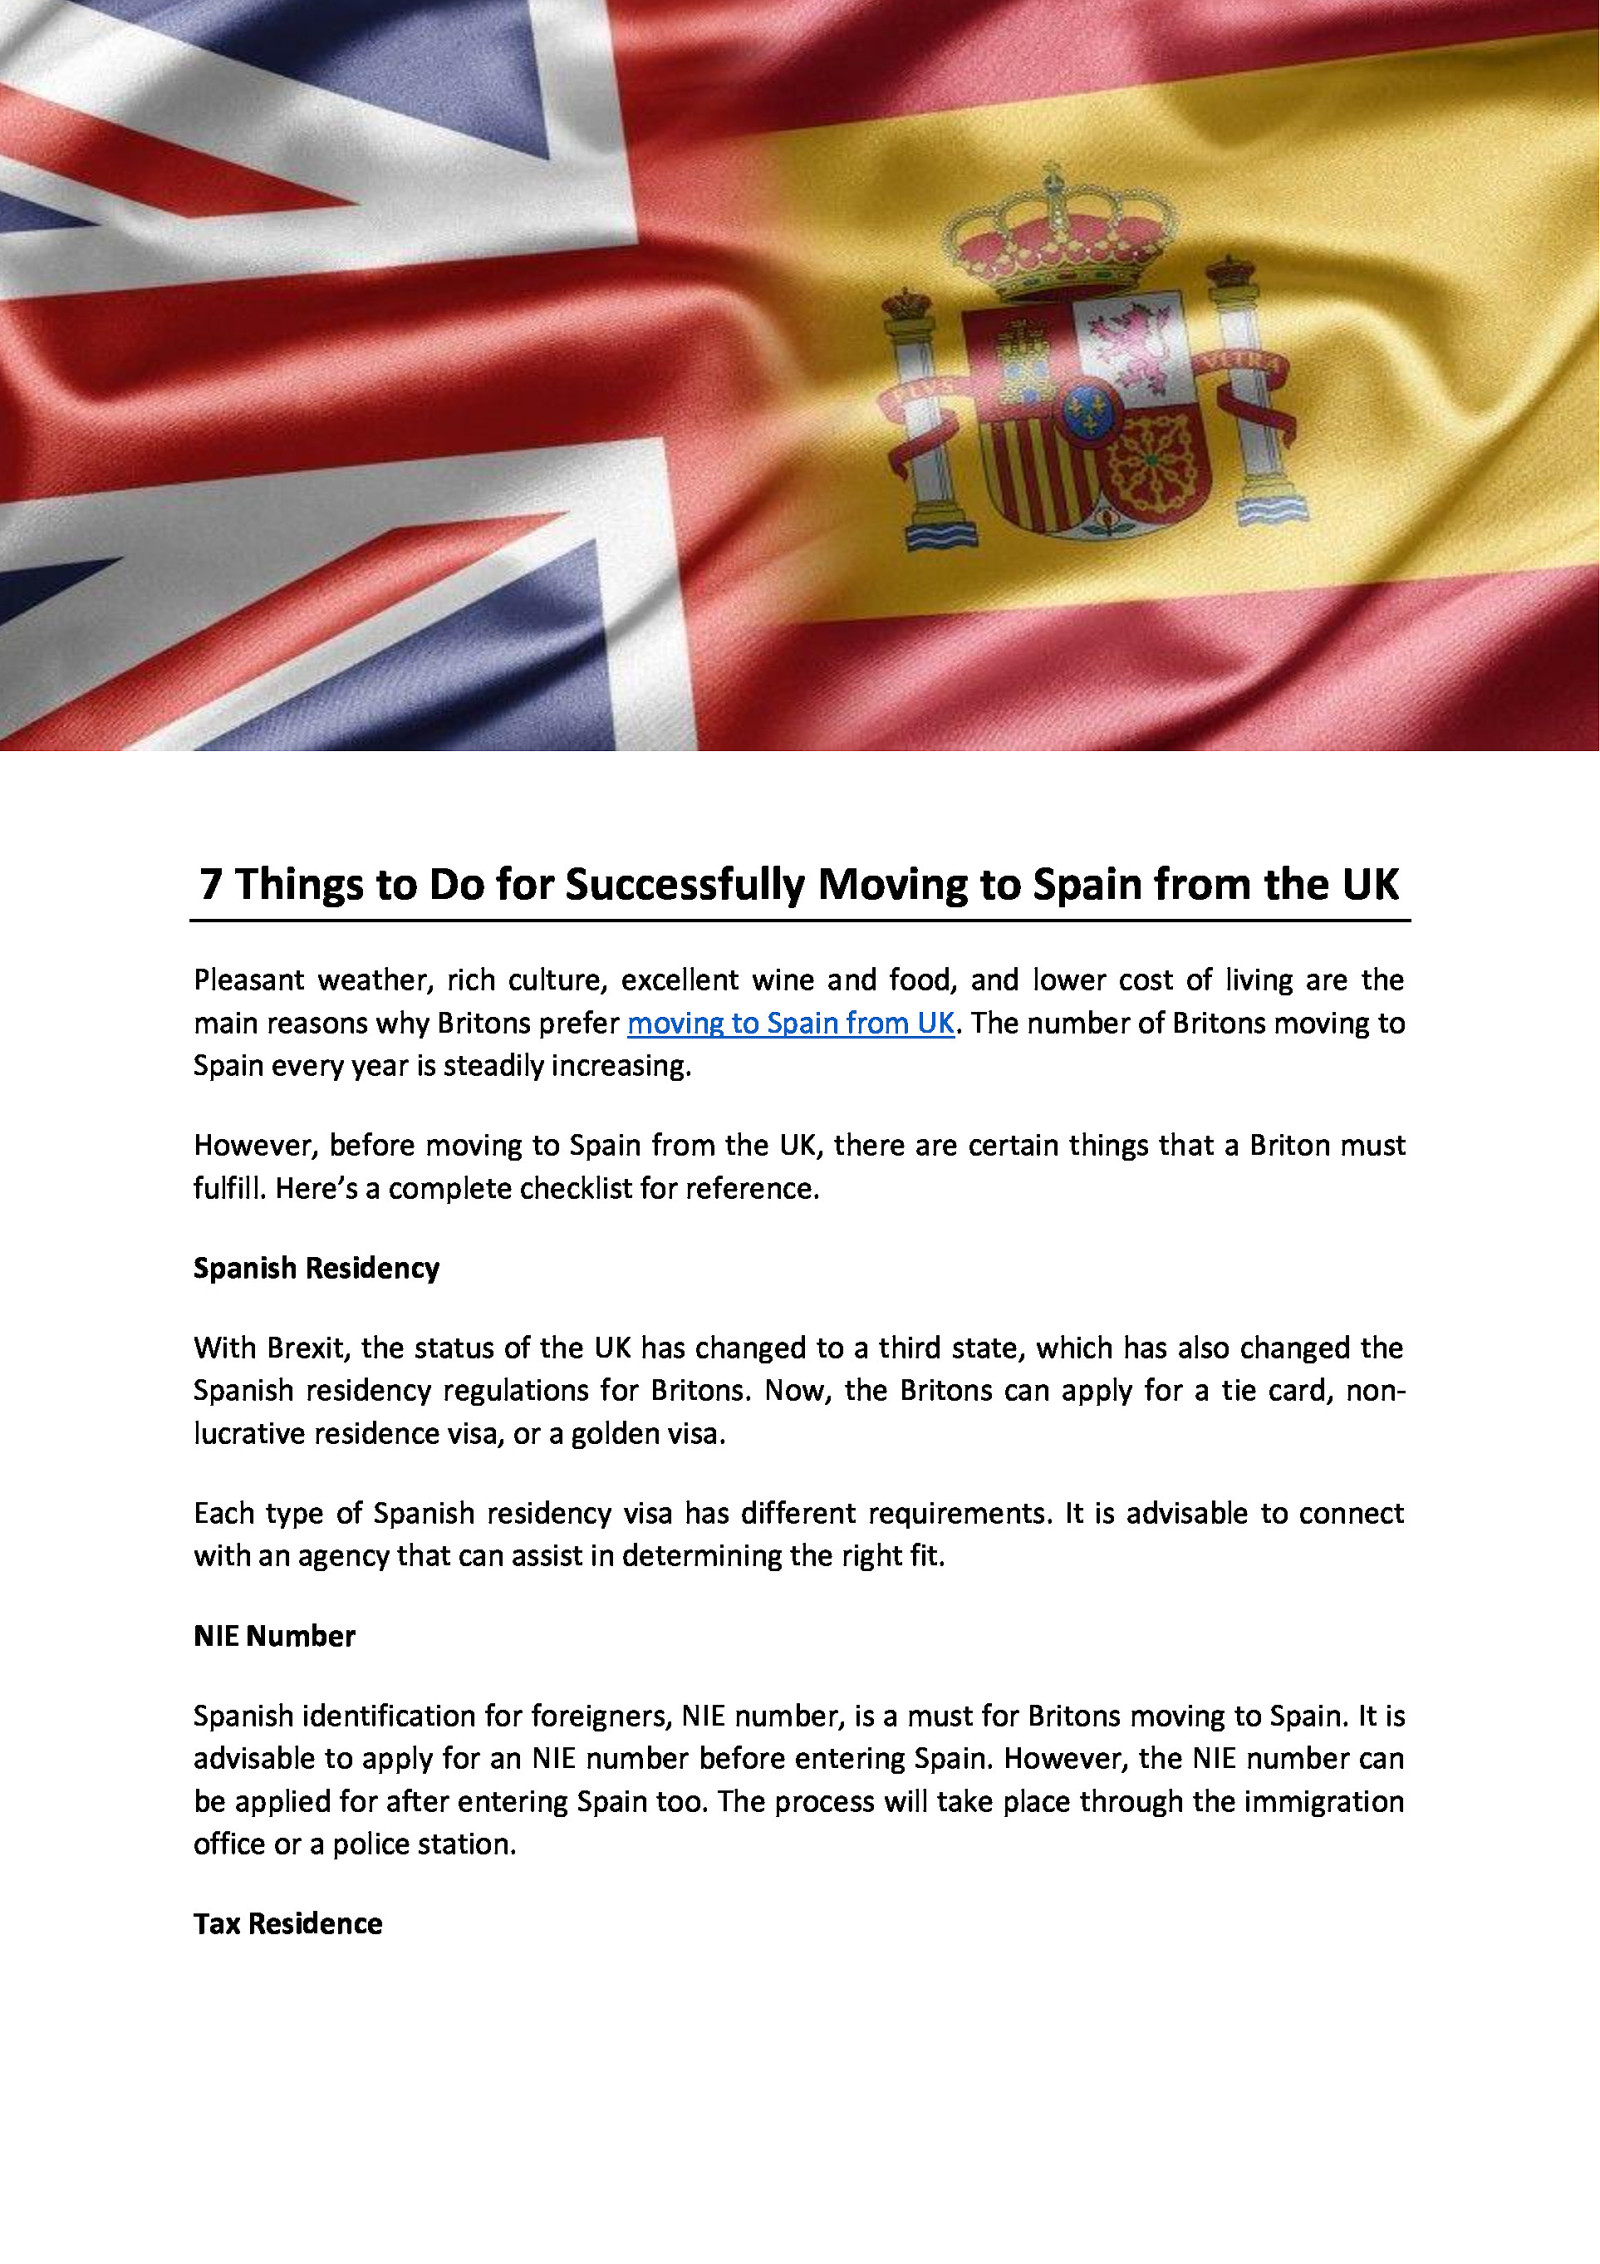 7 Things to Do for Successfully Moving to Spain from the UK